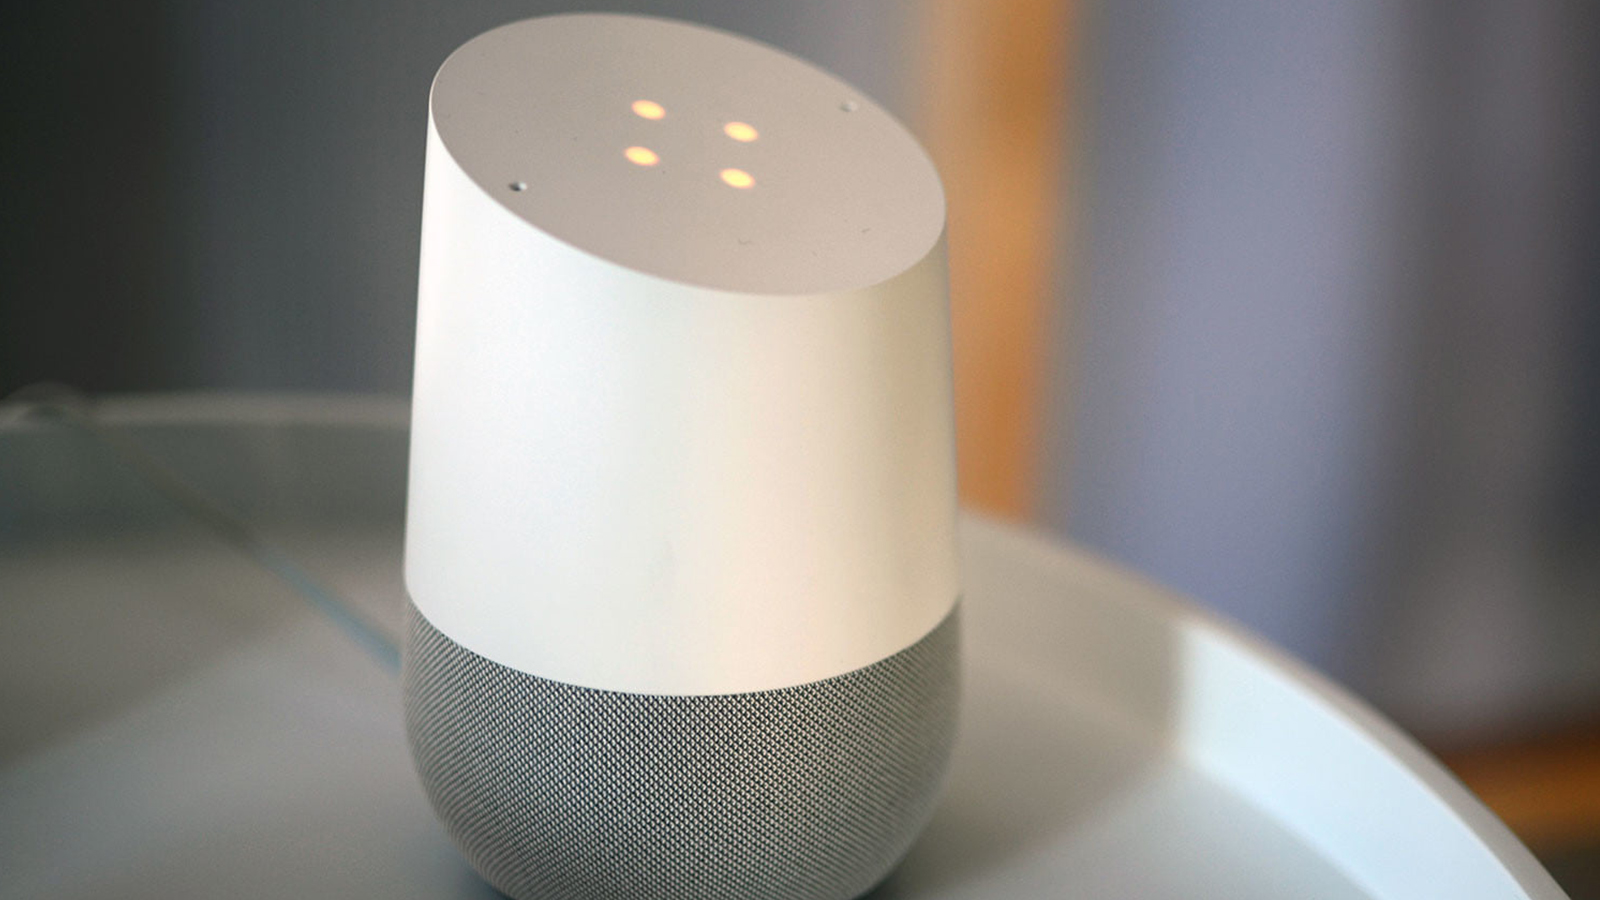 New Google Home and Chromecast Ultra could be revealed in July